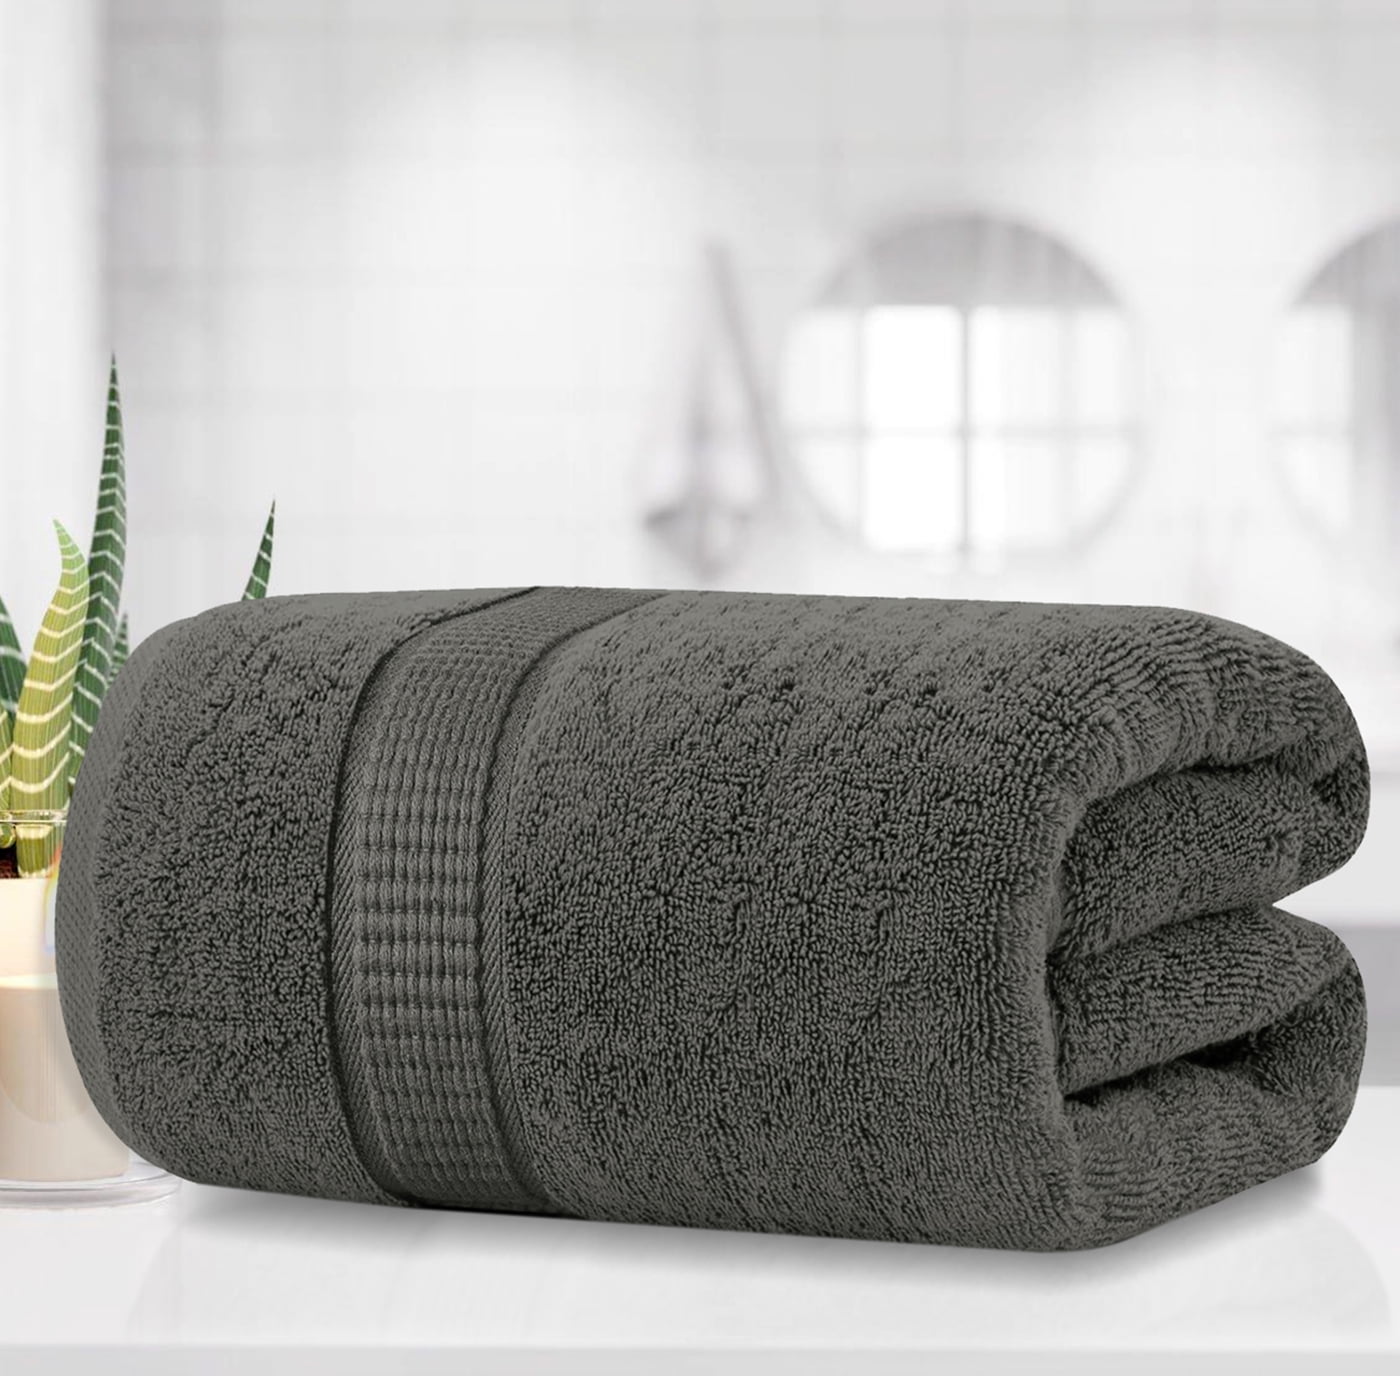 Luxury Bath Sheet Towels Extra Large, 35x70 Inch, 2 Pack, Grey Highly  Absorbent